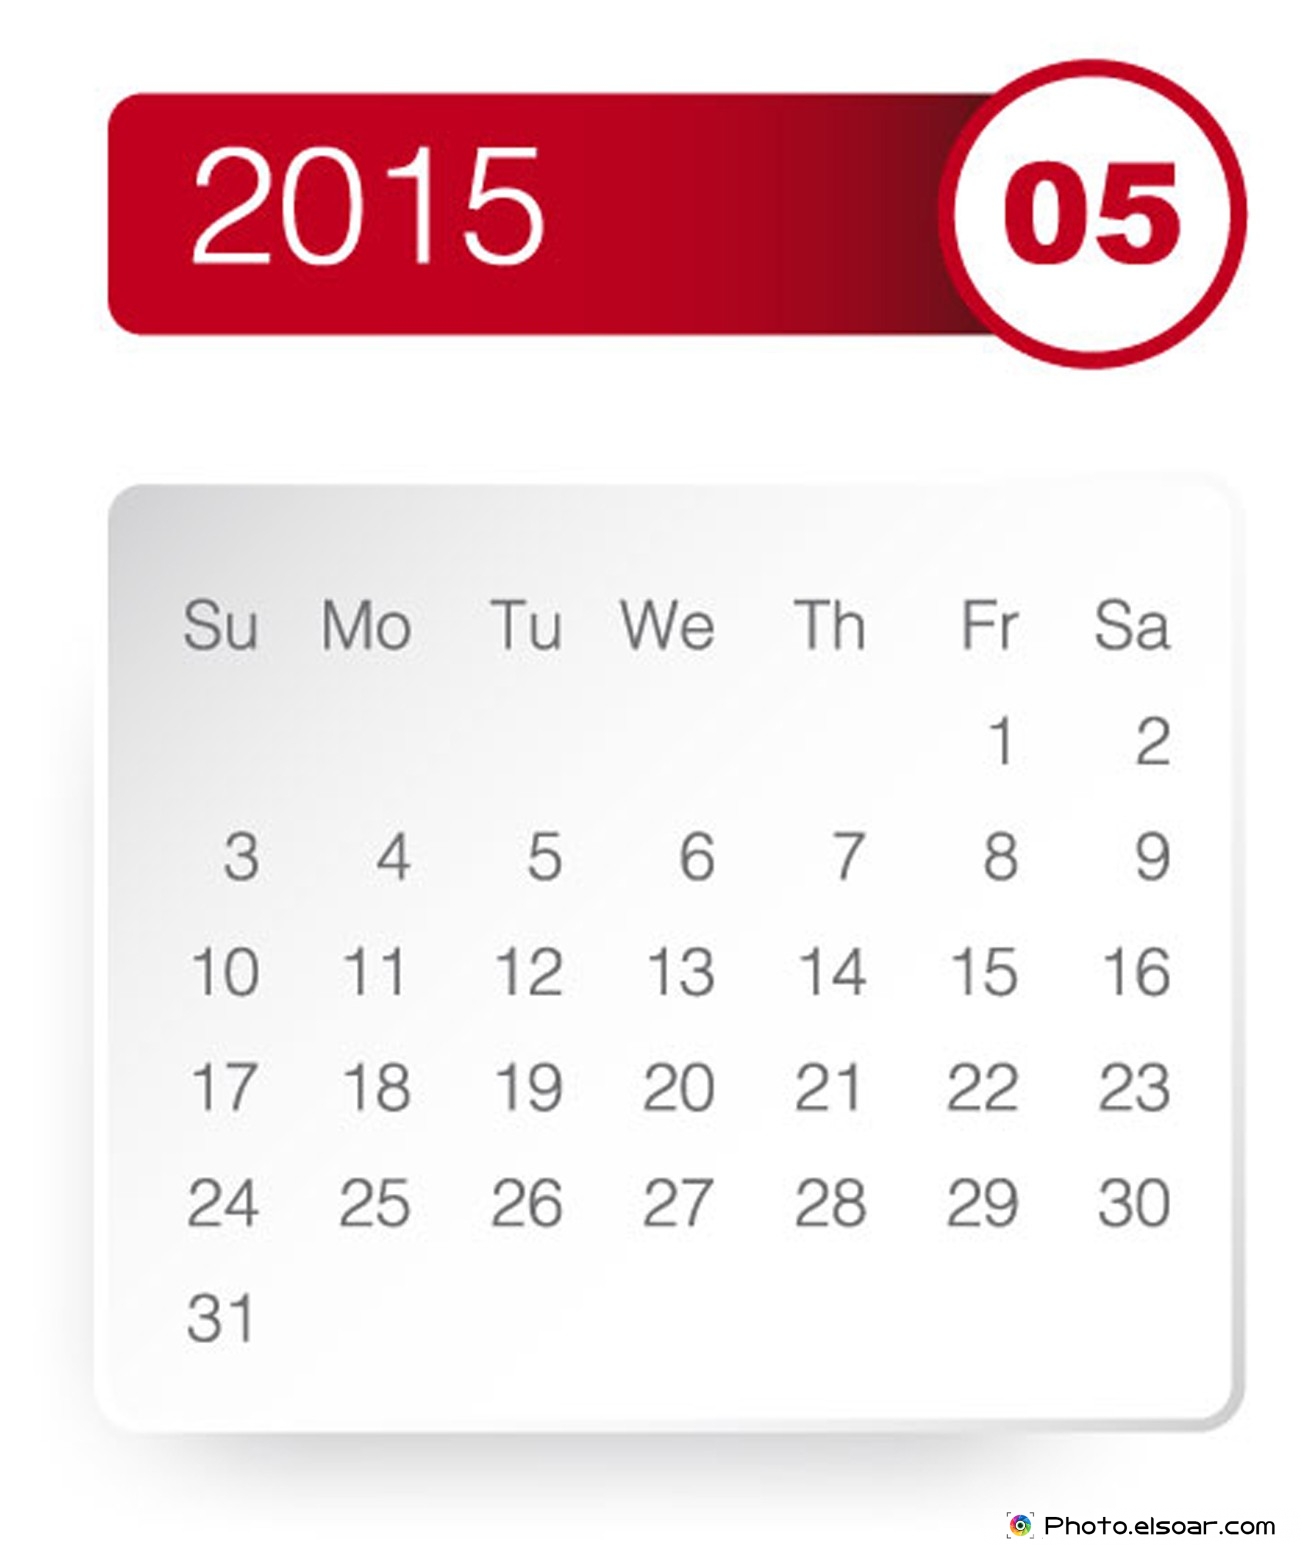 Calendar 2015 Monthly Template from clipart-library.com